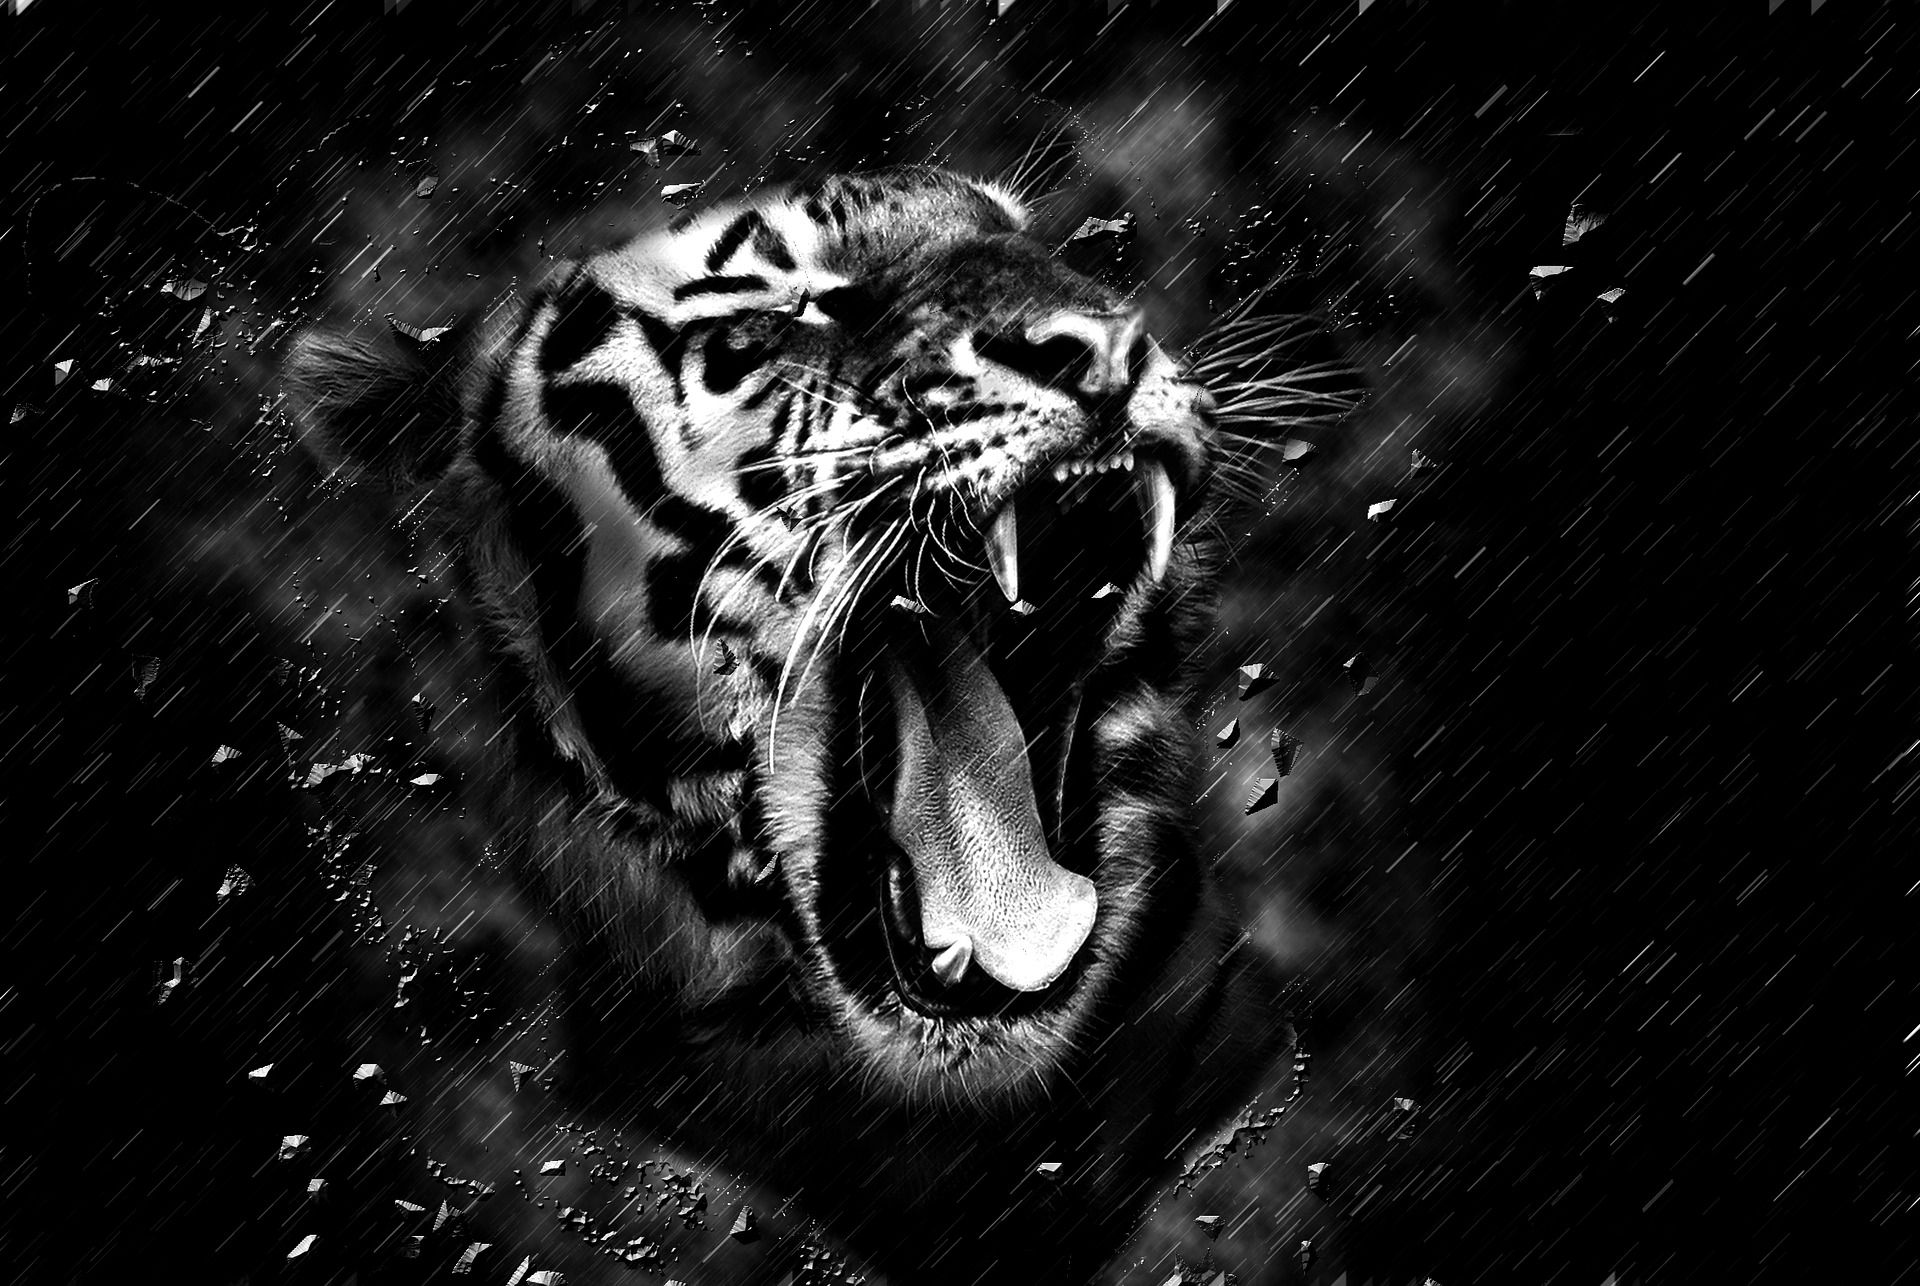 Black Tiger Android Wallpapers - Wallpaper Cave